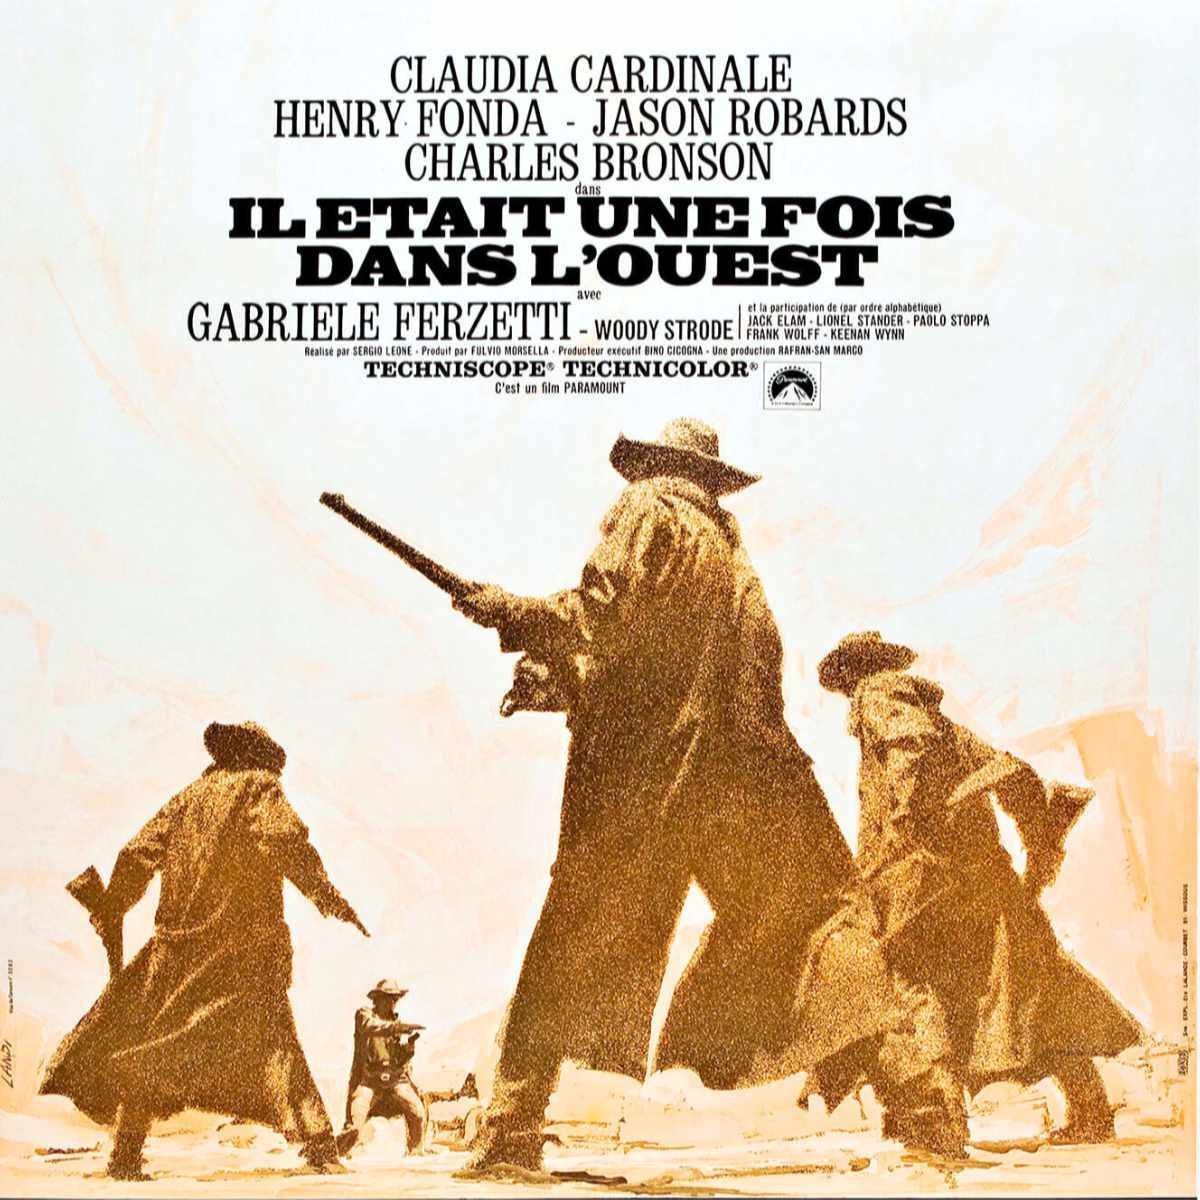 Screening in stunning 35mm! Sergio Leone's ONCE UPON A TIME IN THE WEST (1968) plays Saturday & Sunday at 2:00pm & 7:00pm; Monday - Thursday at 3:00pm & 7:30pm. Tickets available at the box office & online: buff.ly/3xZcstn